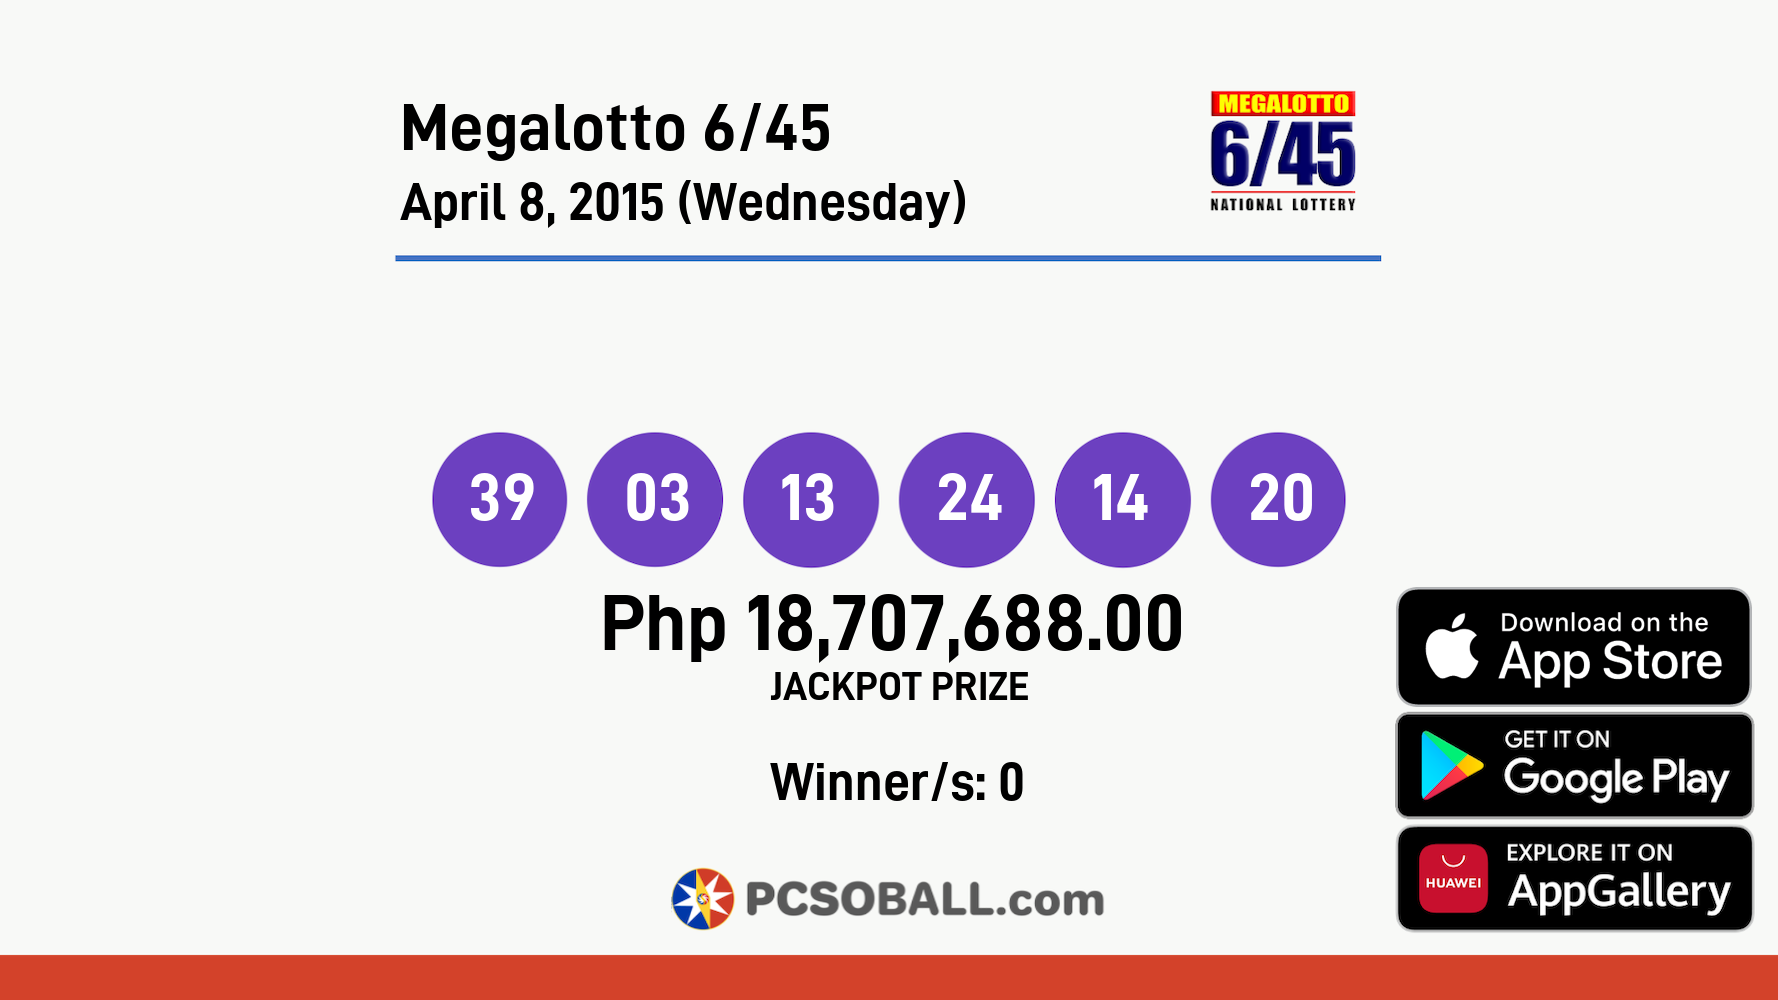 Megalotto 6/45 April 8, 2015 (Wednesday) Result